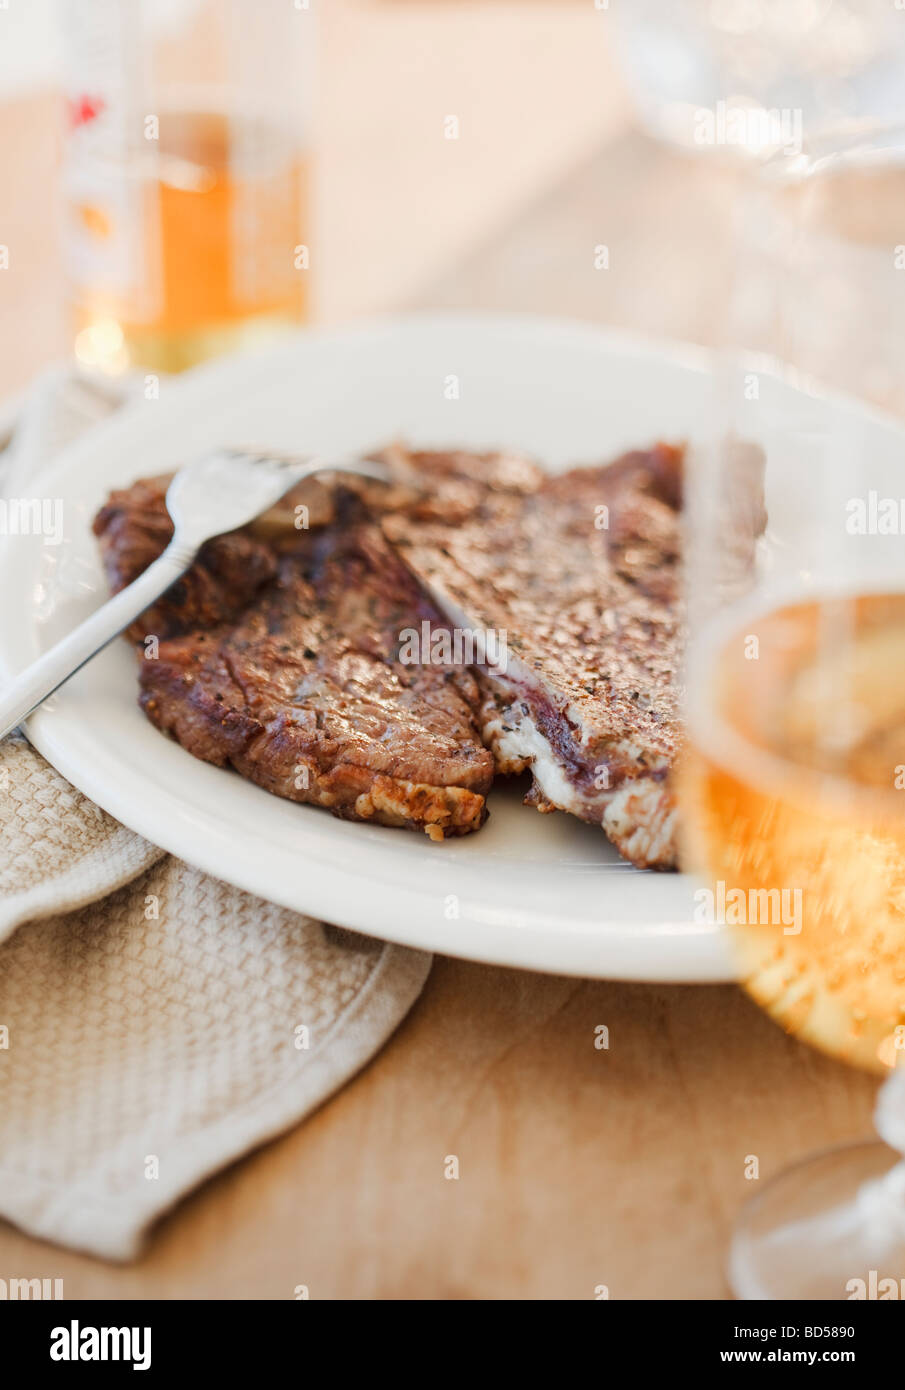 Steak and beer Stock Photo